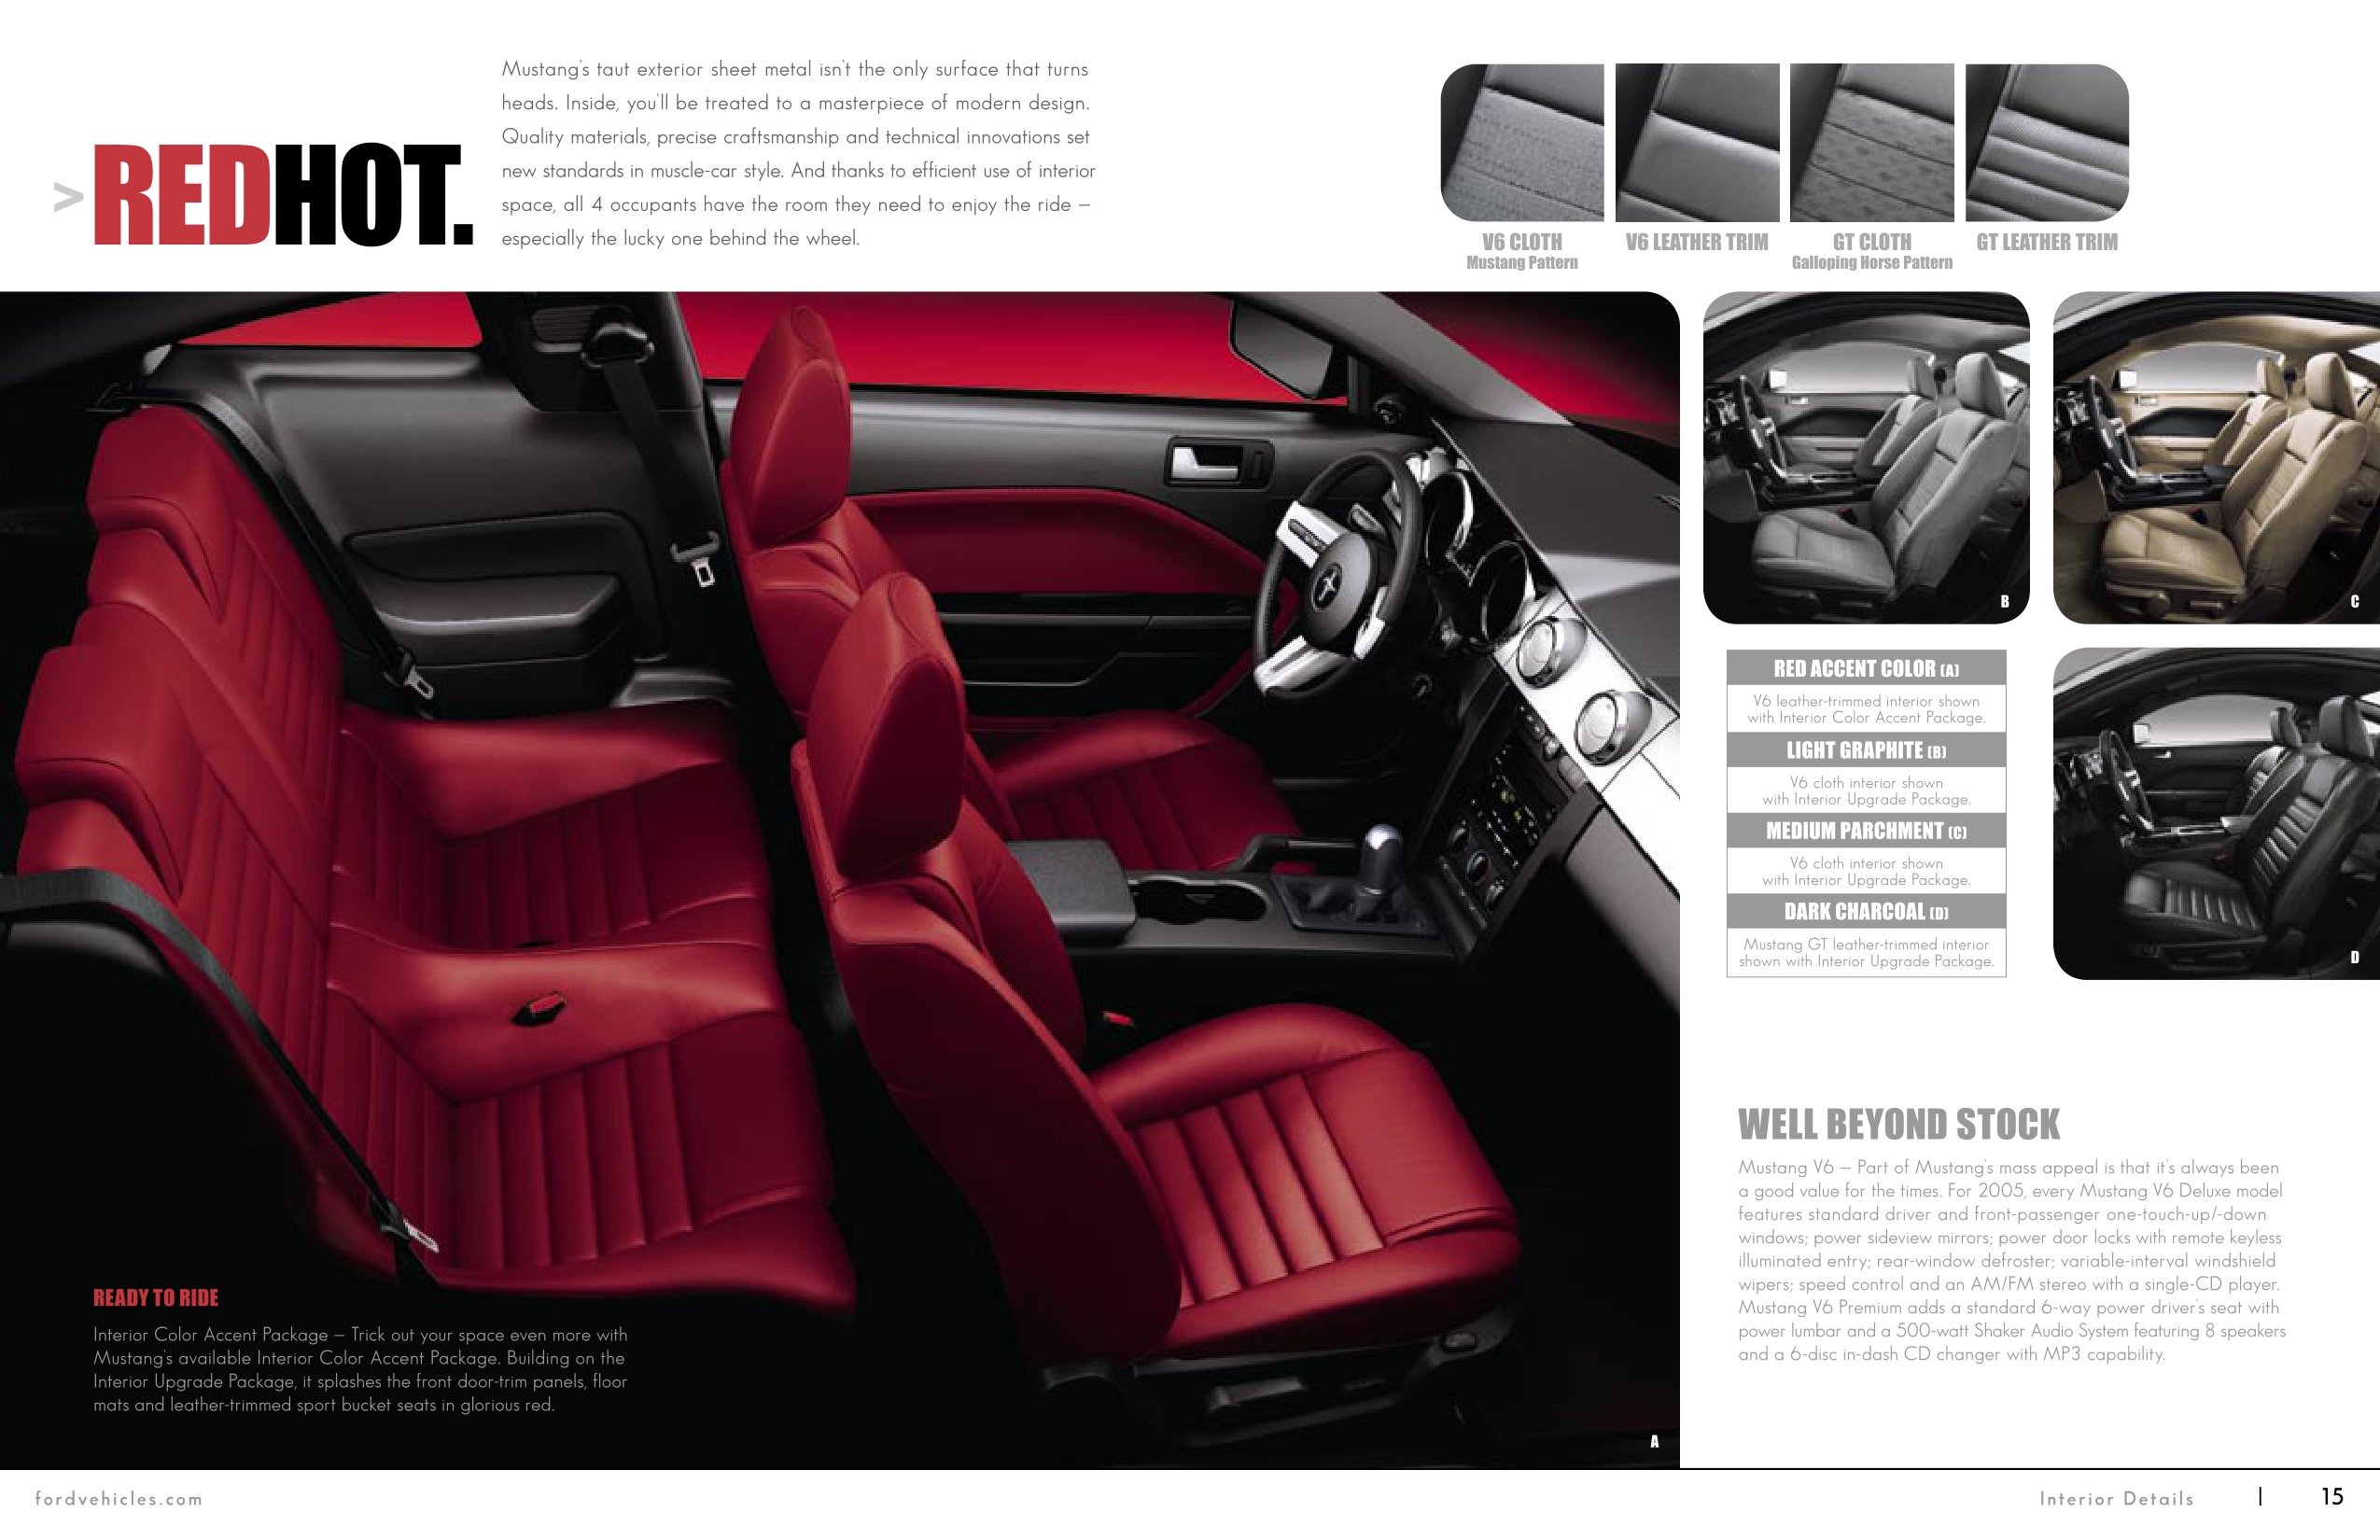 2005 Ford Mustang Brochure Page 9